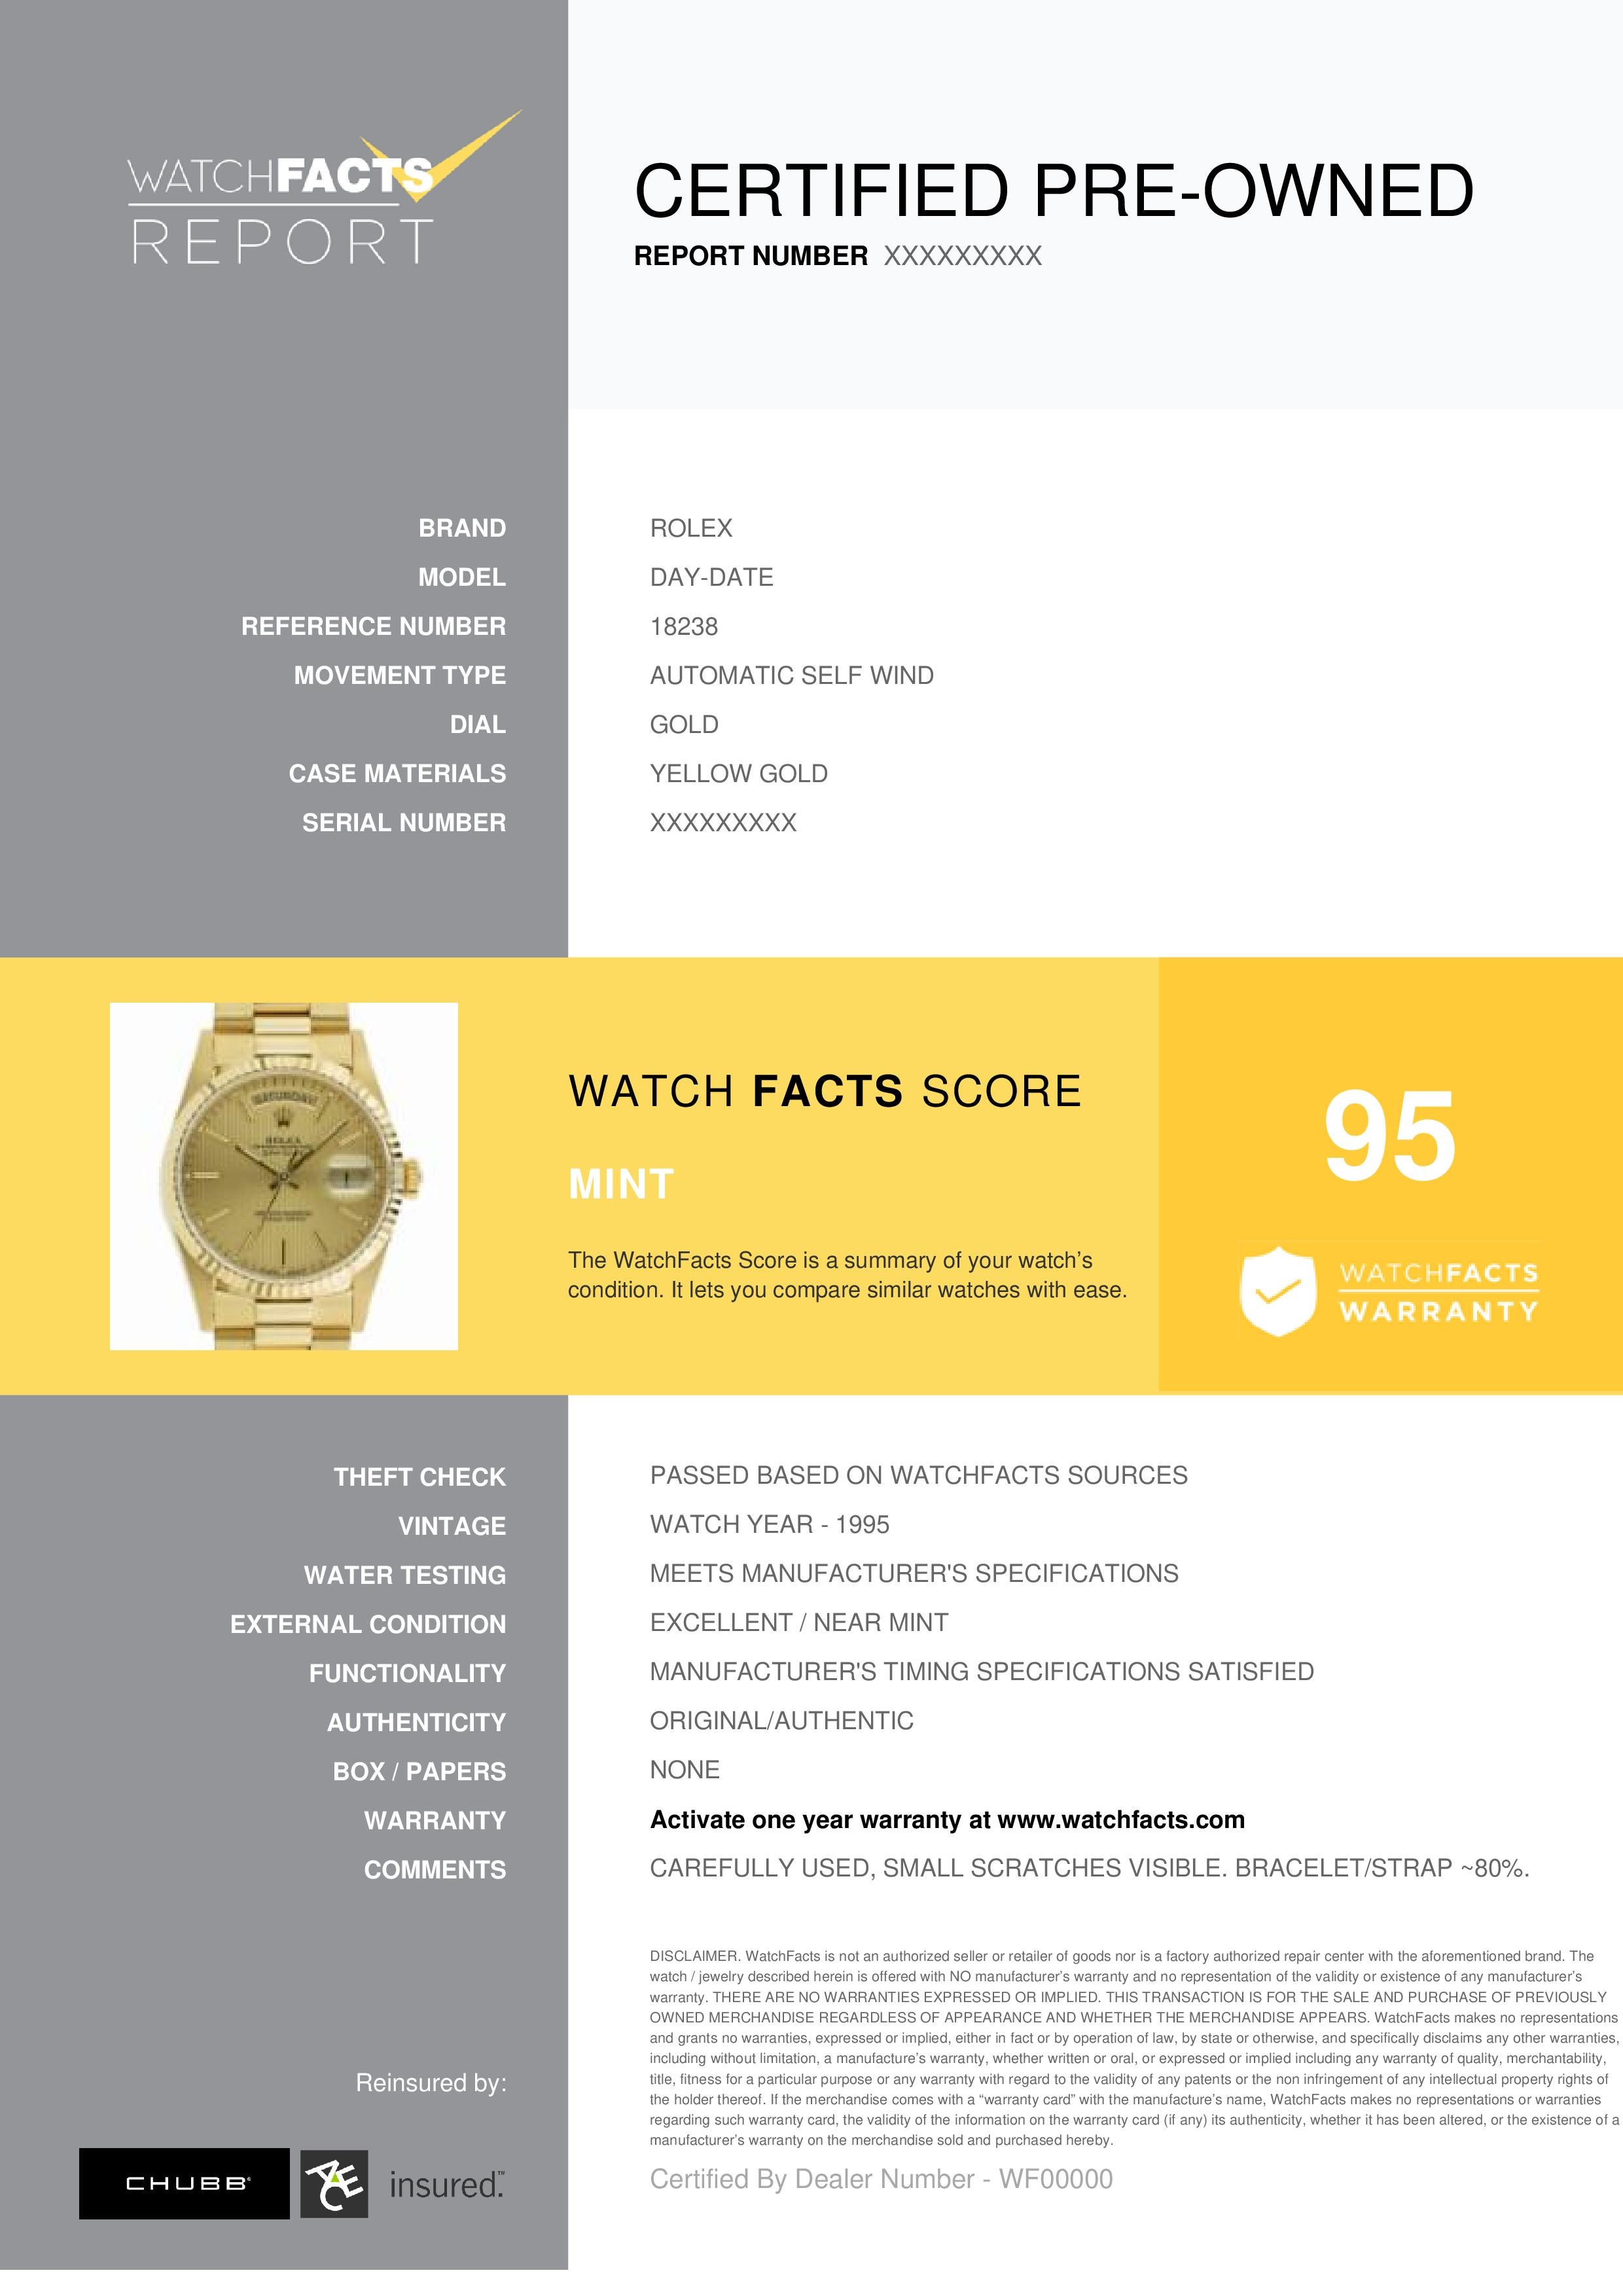 Rolex Day-Date Reference #:18238. men's yellow gold, Rolex, Day-Date 18238, automatic self wind. Verified and Certified by WatchFacts. 1 year warranty offered by WatchFacts.